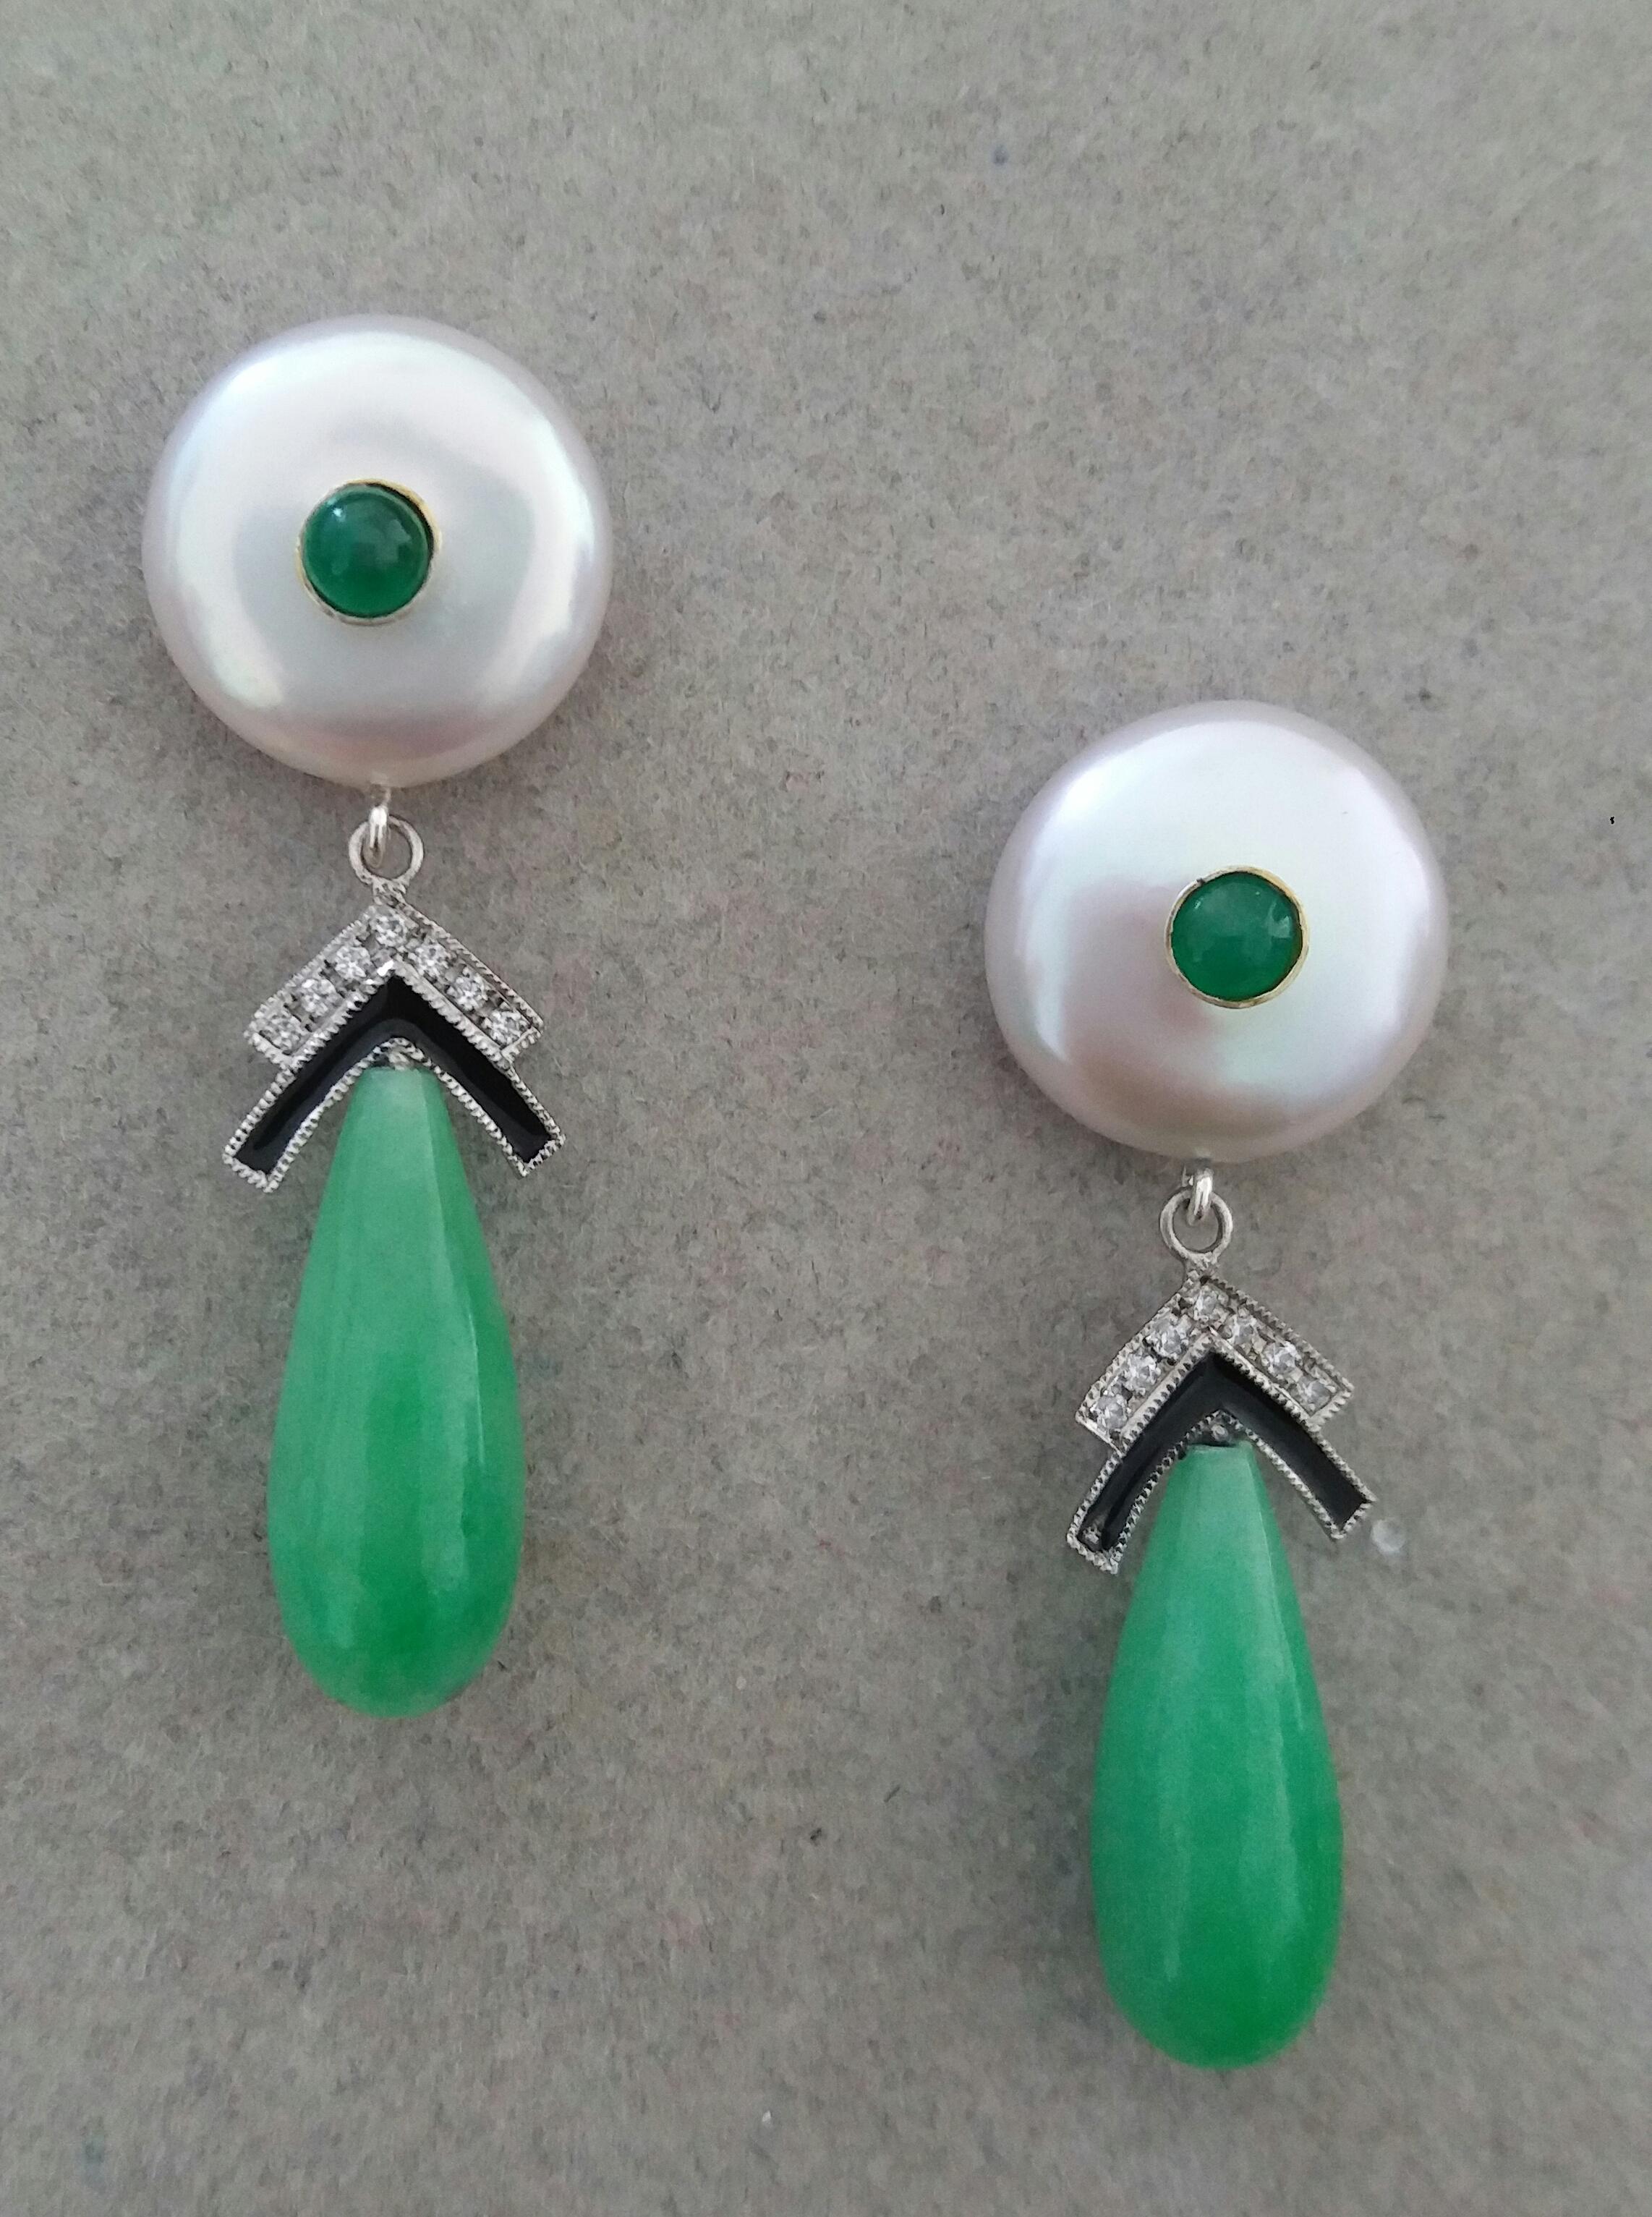 Classic Art Deco Style earrings with the top with 2 round flat Fresh Water pearls 14 mm in diameter with small round emerald cabs in the center,middle parts are composed of 2 white gold elements , 14 full cut  round diamonds and black enamels,2 Jade